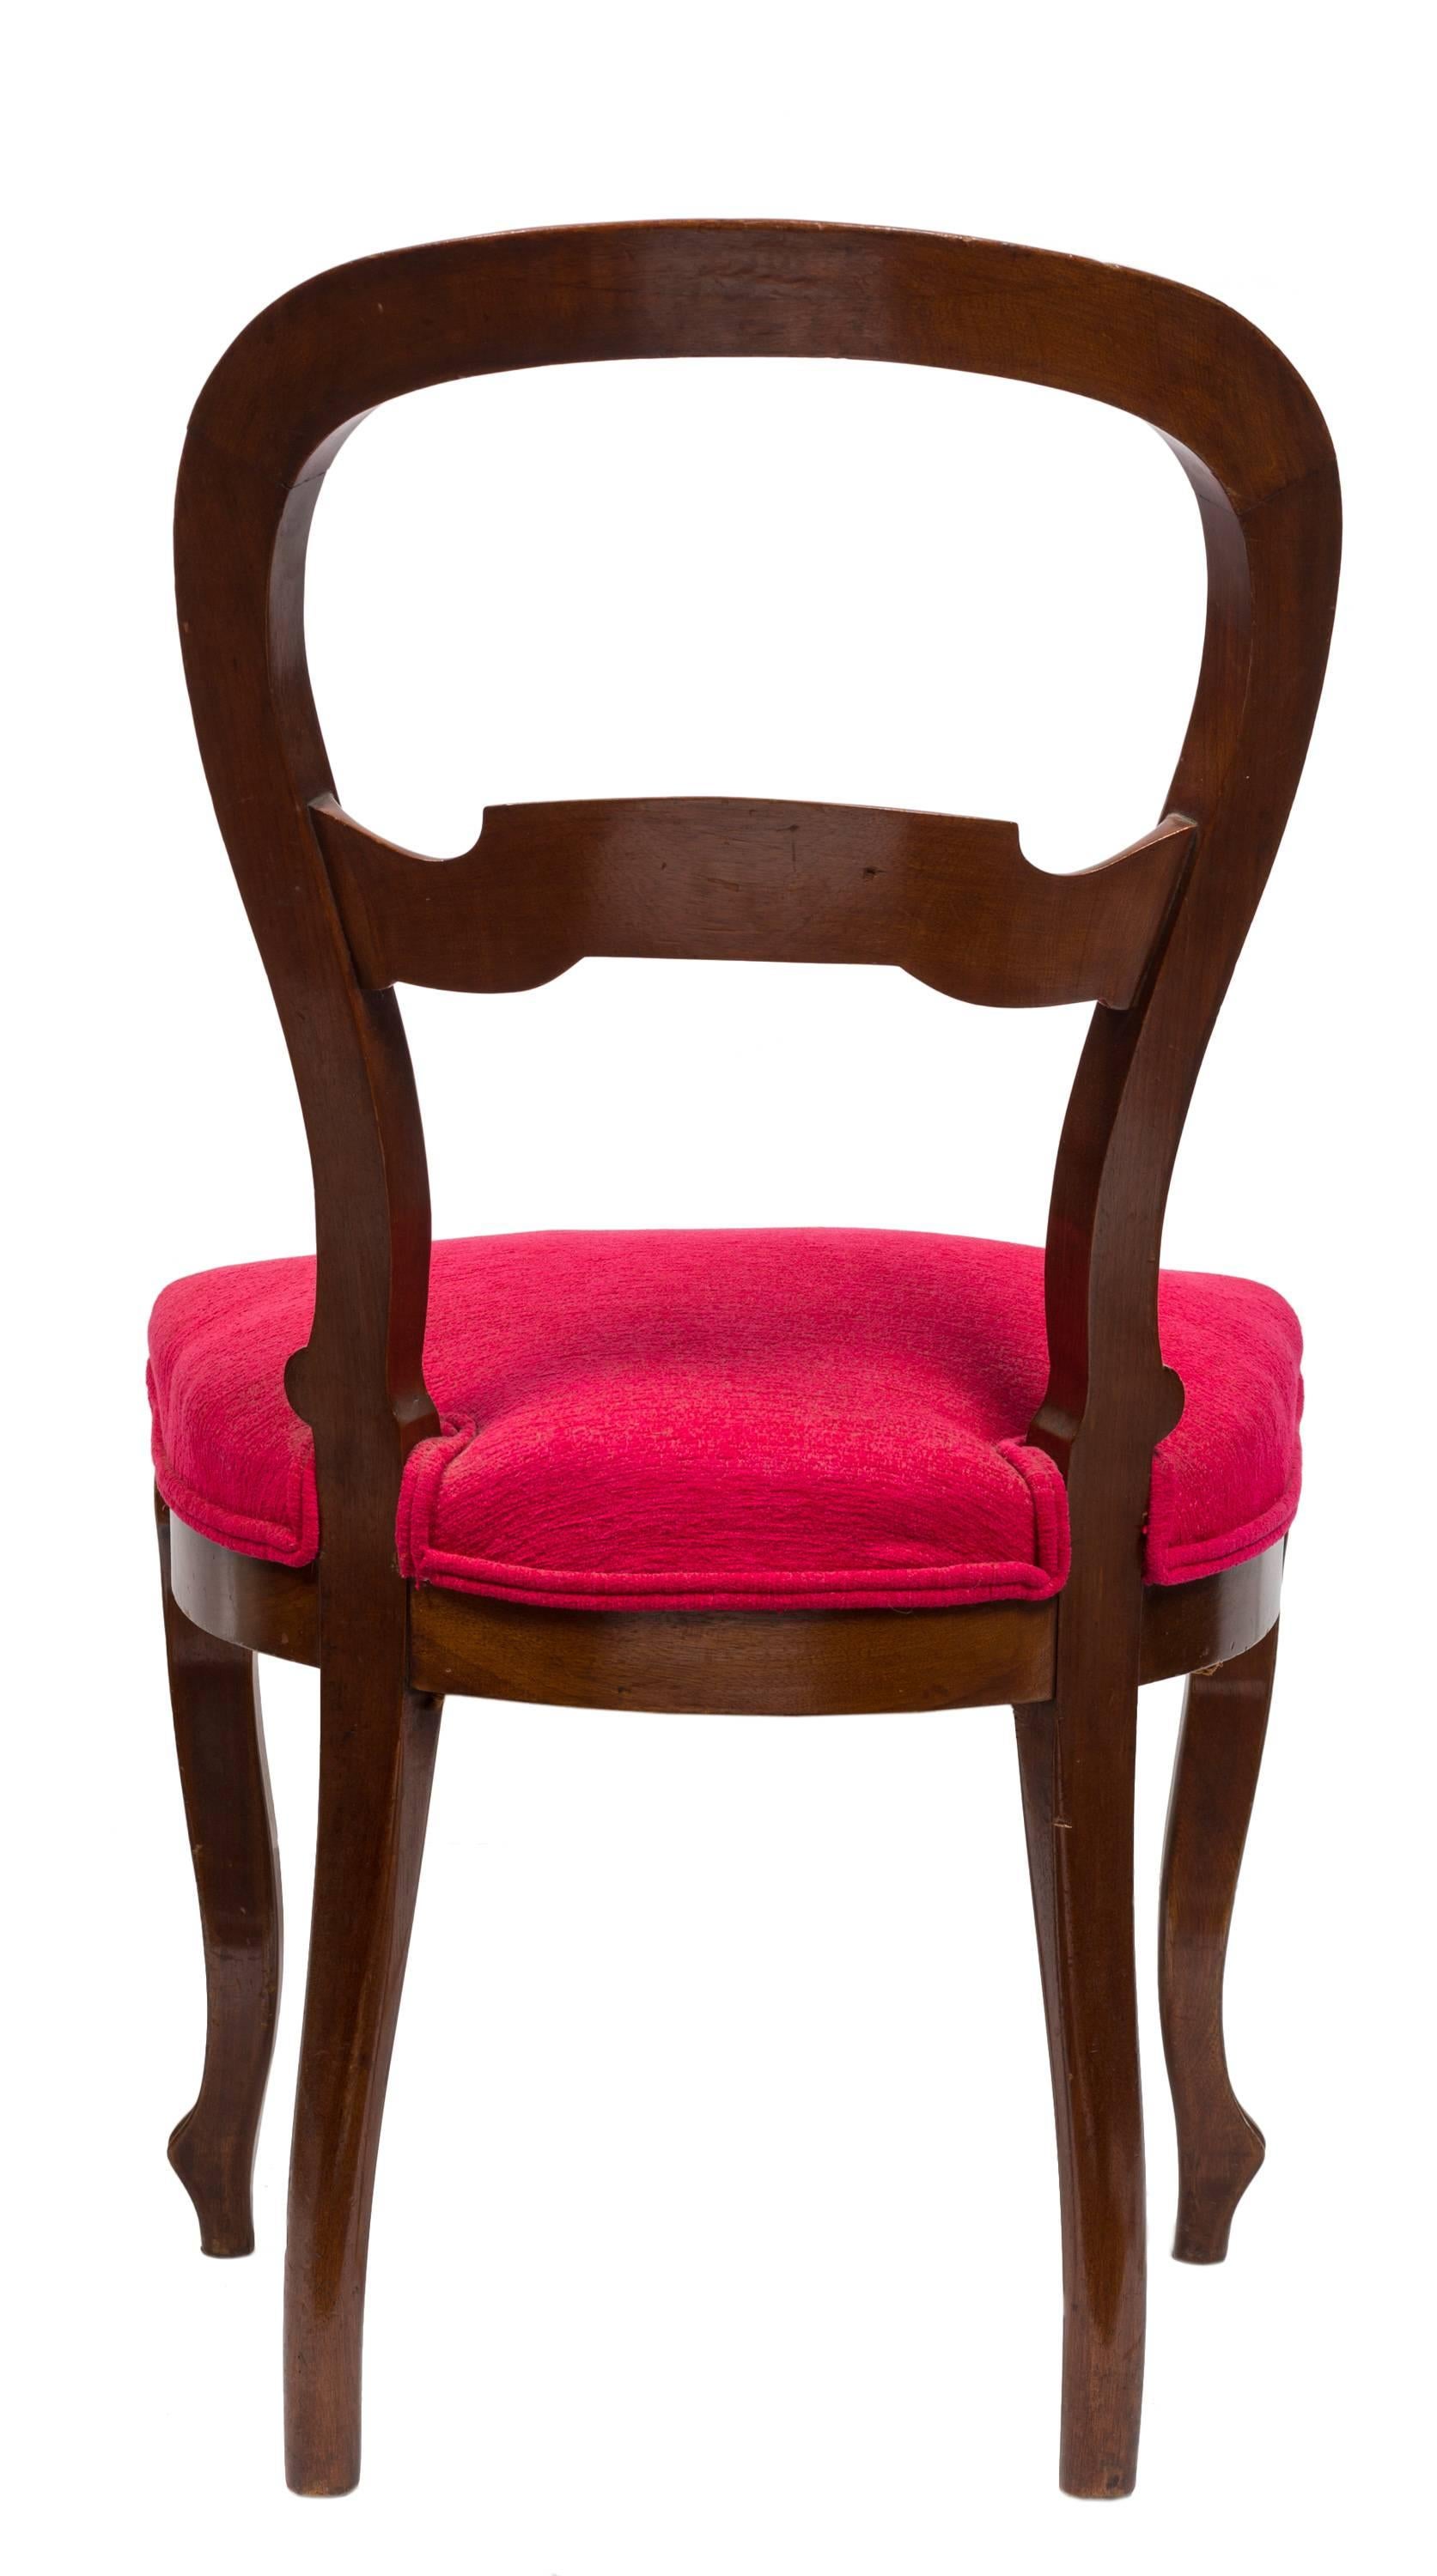 Pair of Unmatched 19th Century Walnut and Magenta Red Fabric Spanish Chairs 2